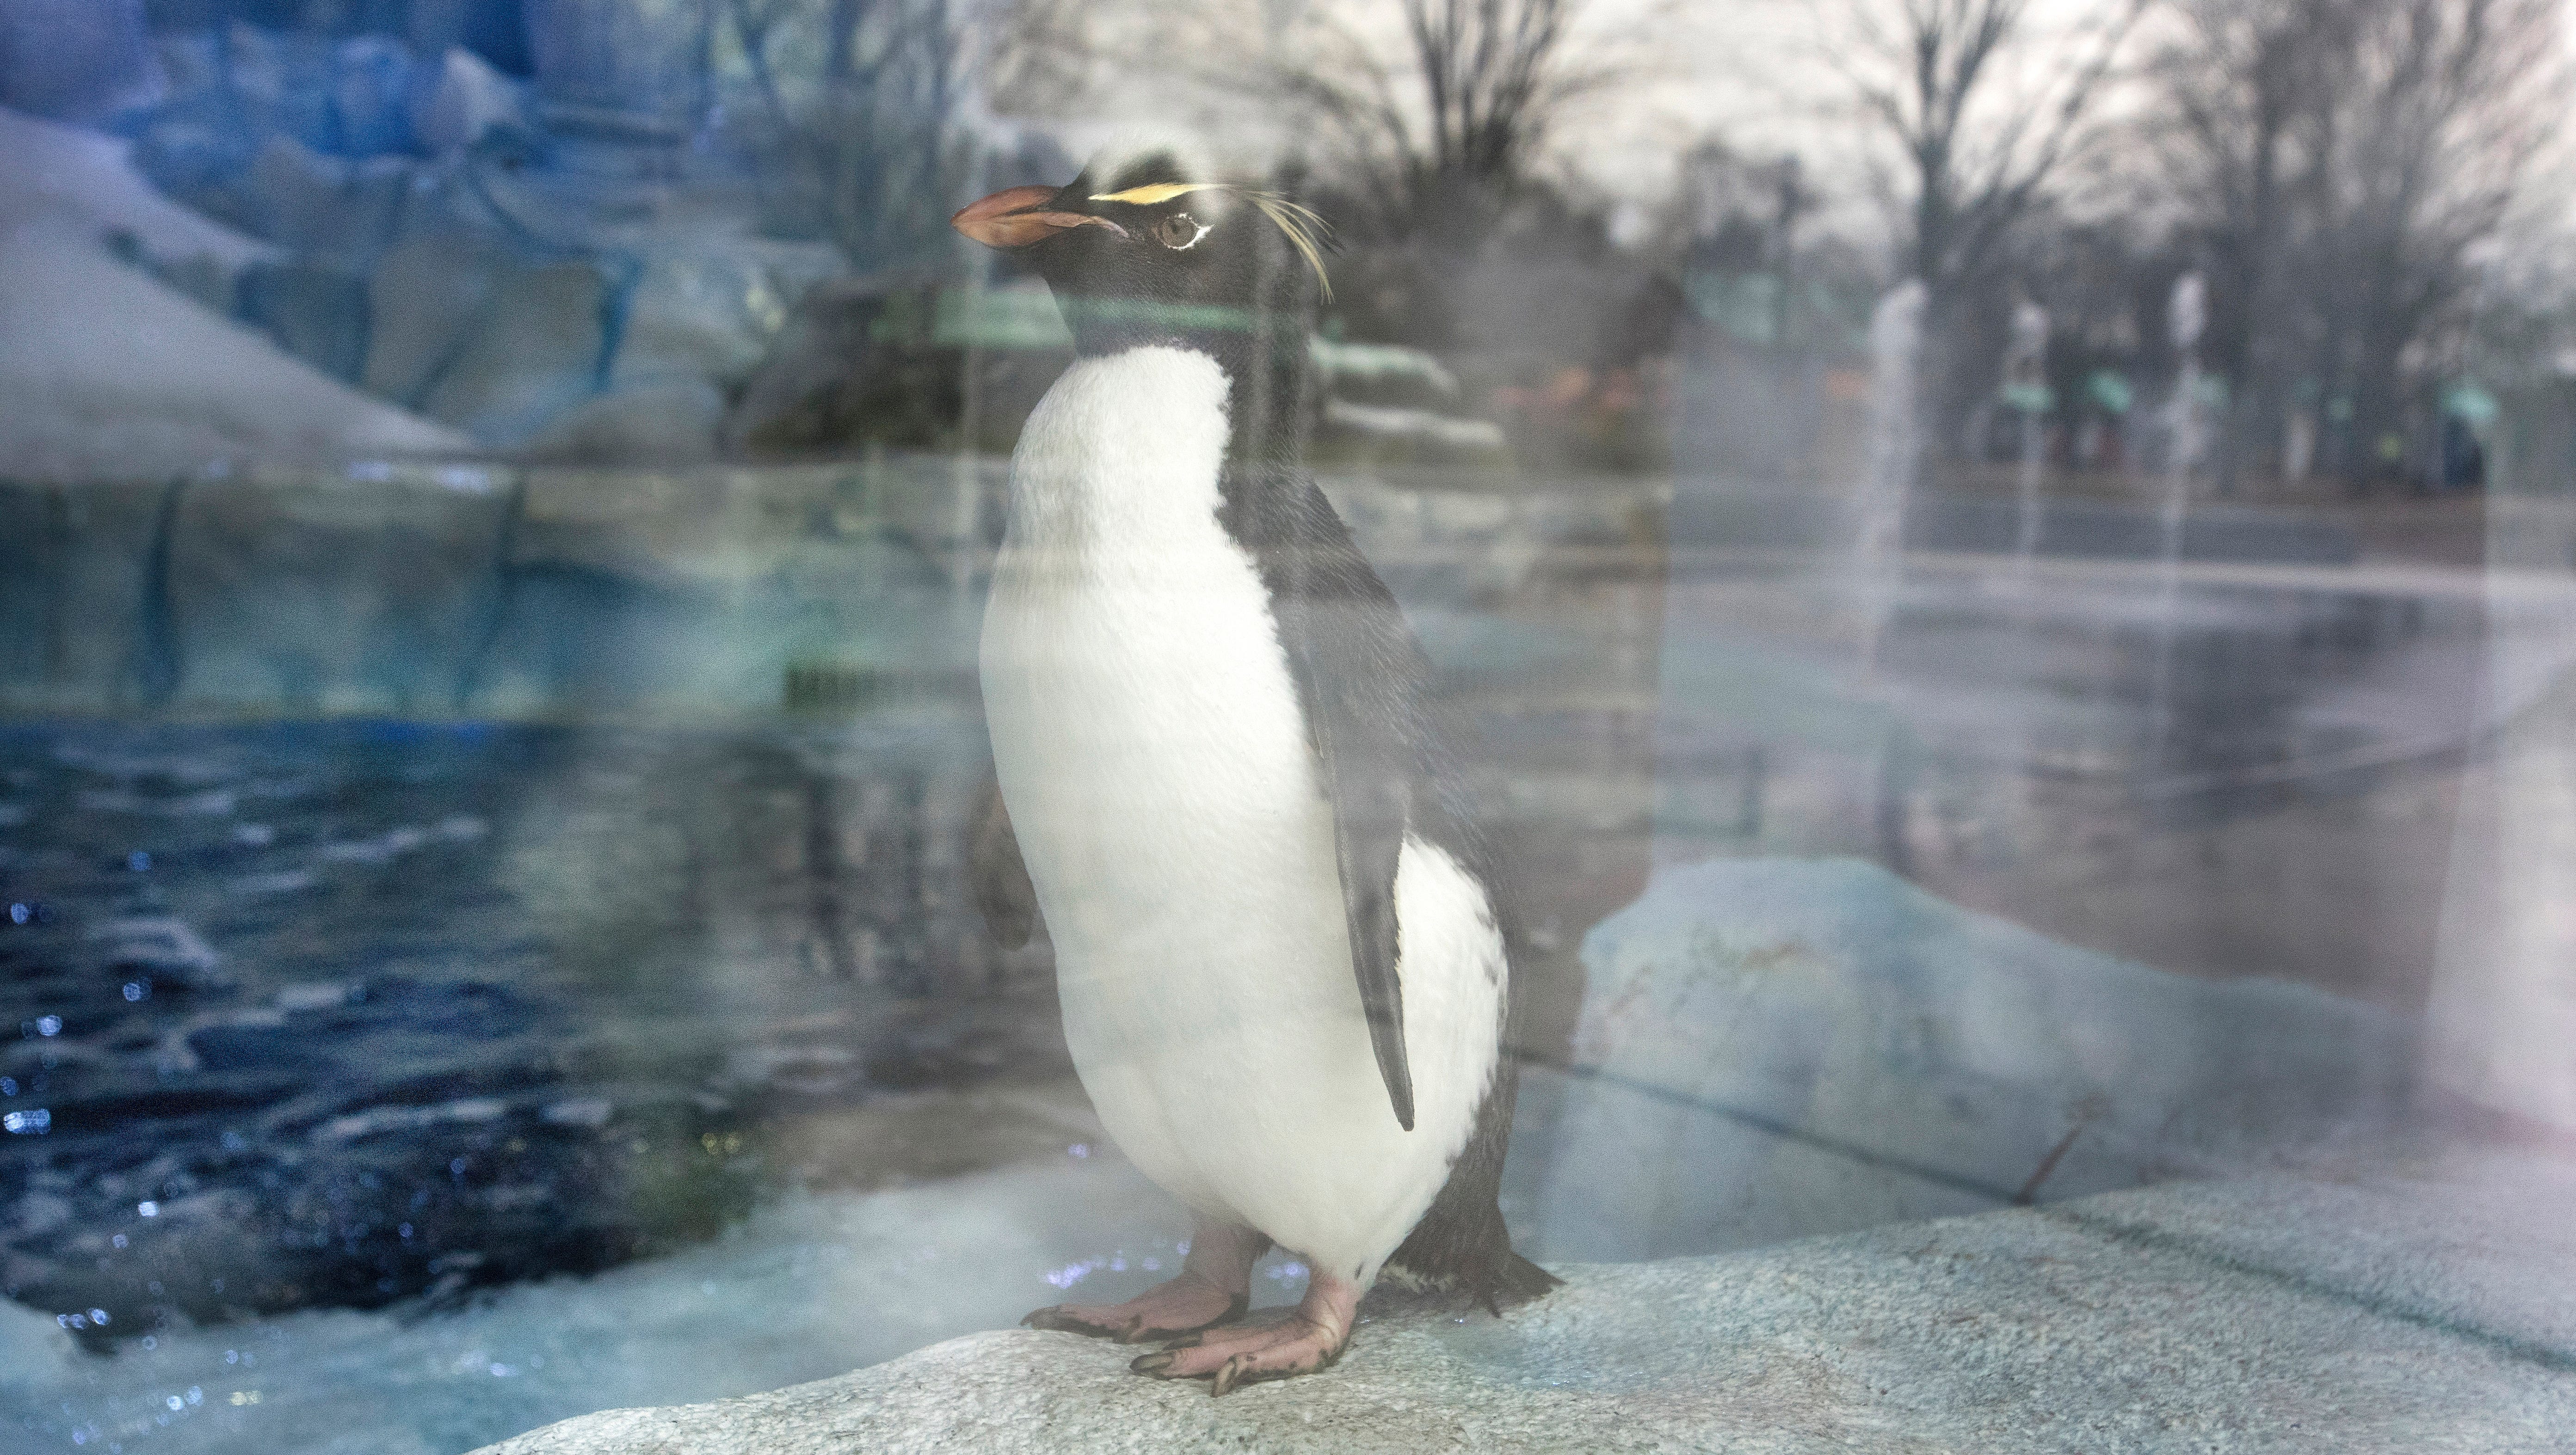 A penguin looks out a window.